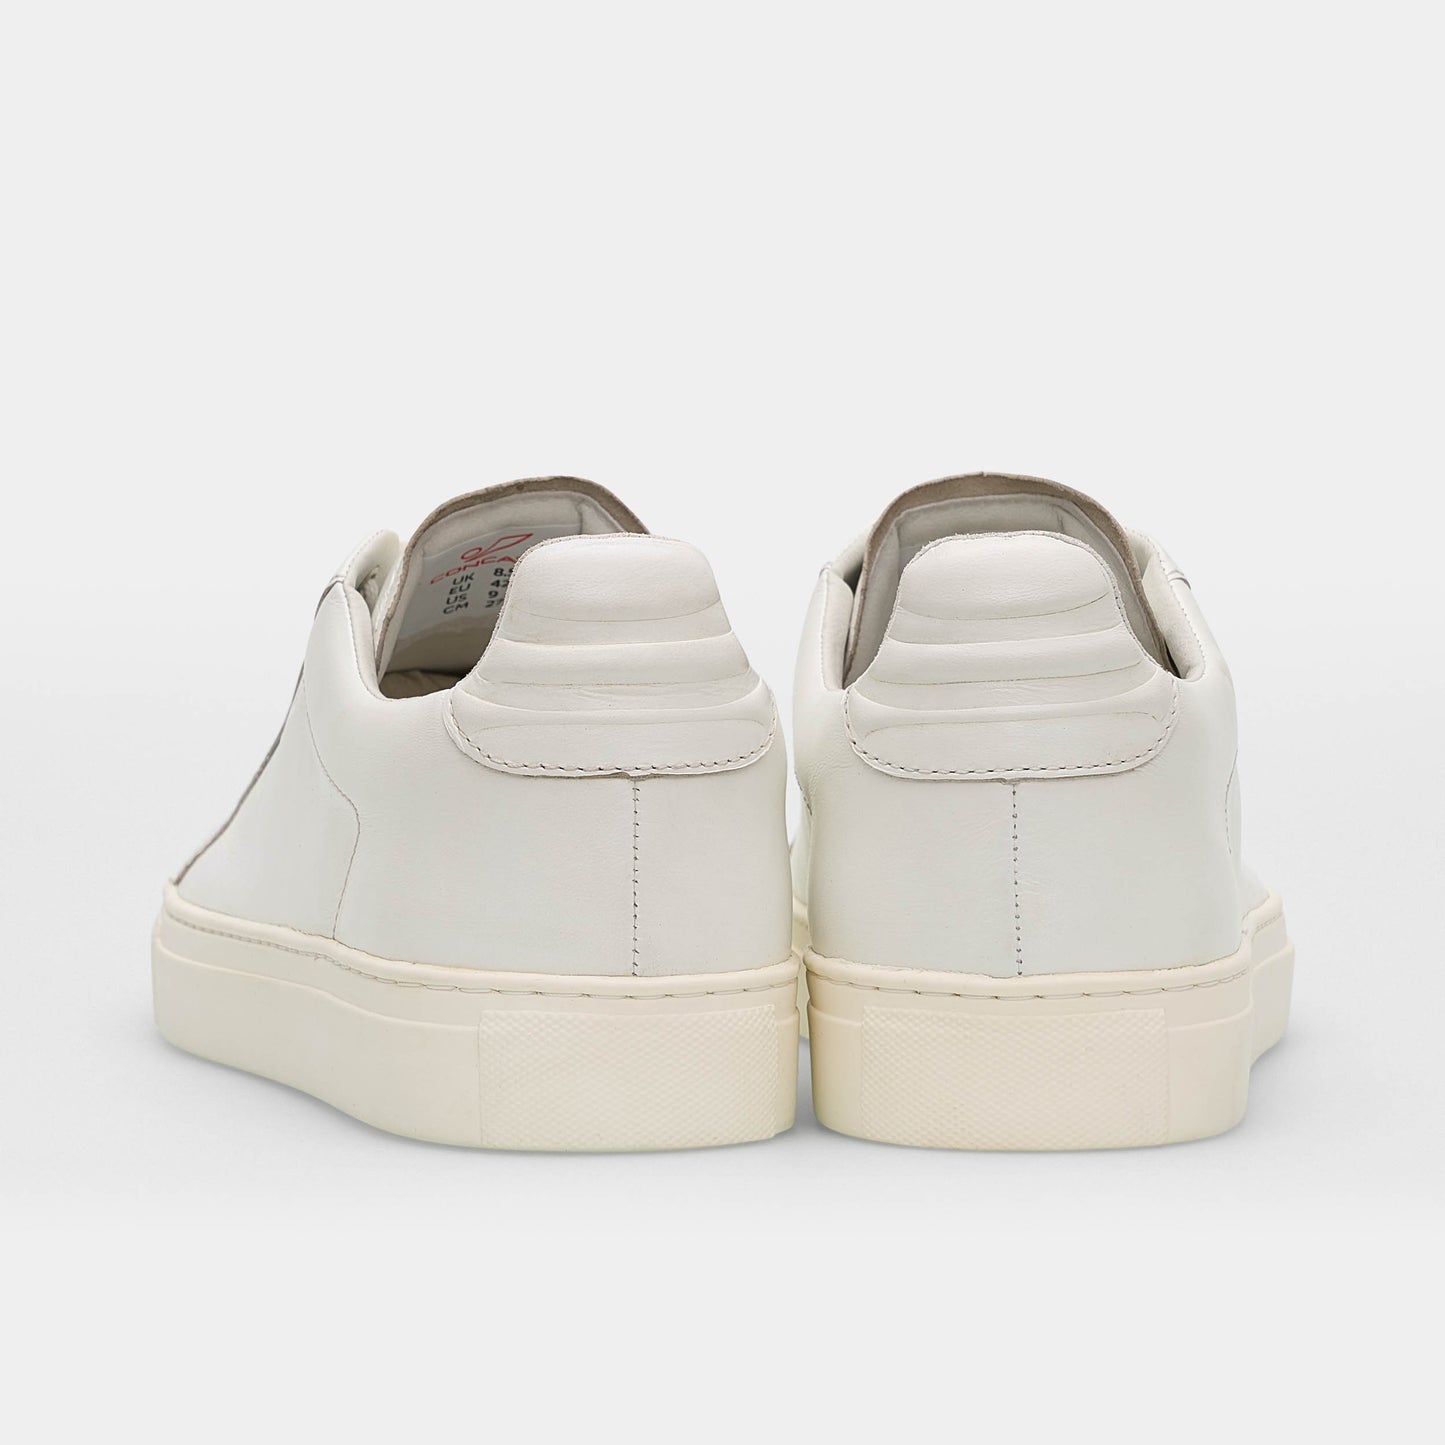 Concave Sneaker - White/Gold